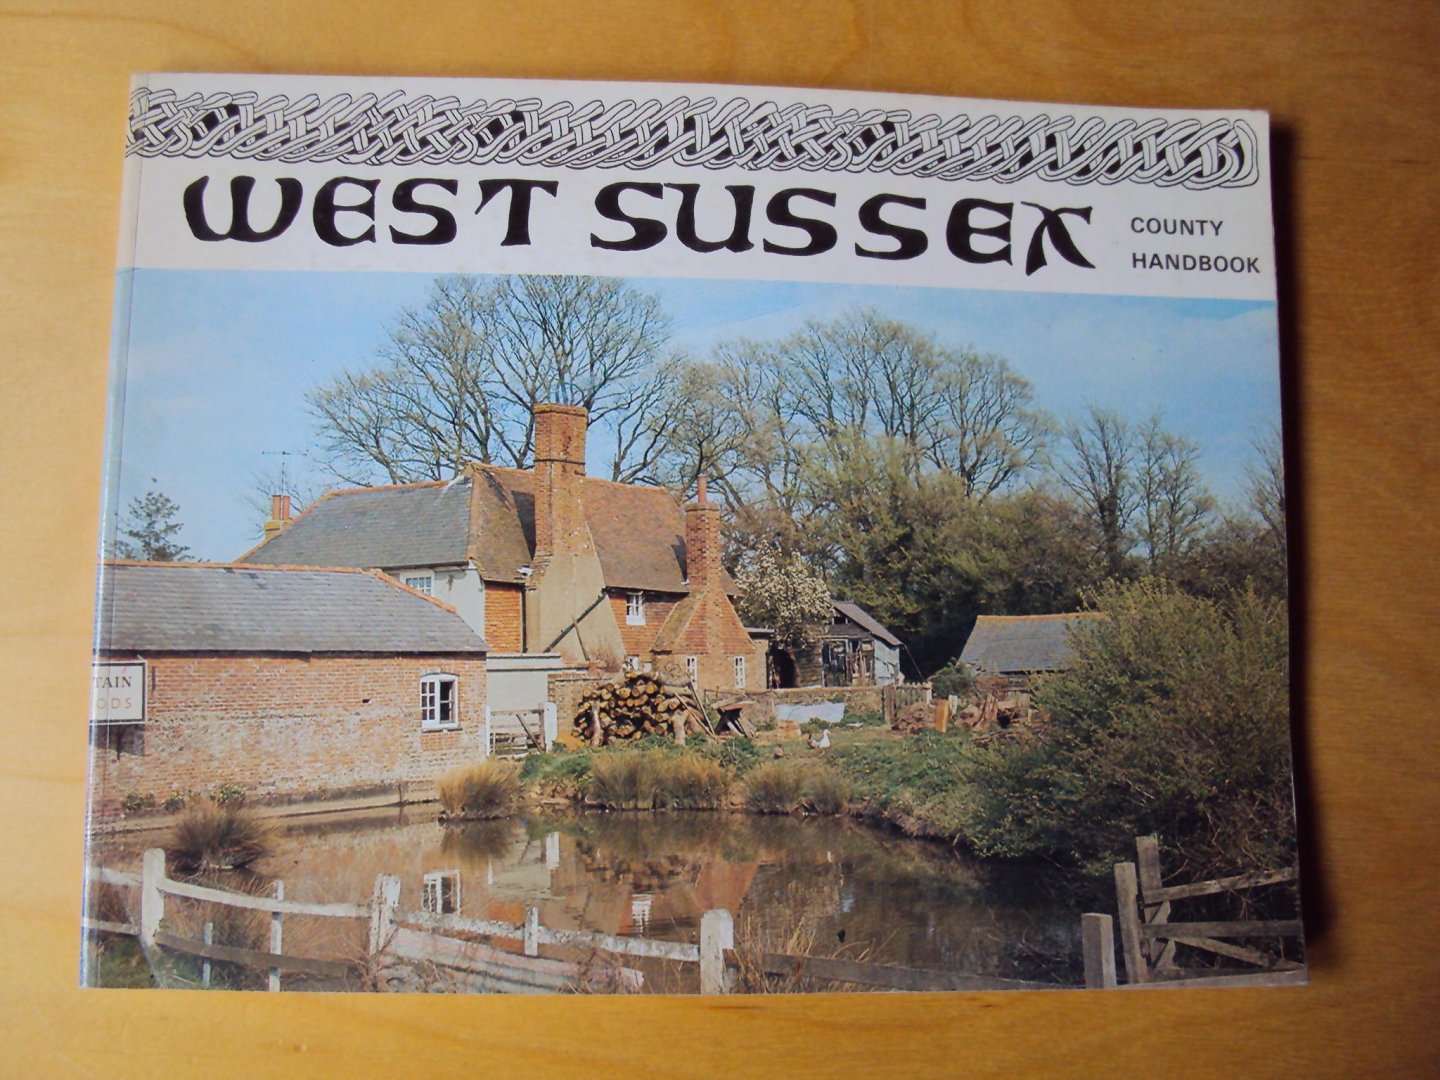 West Sussex County Council - West Sussex County Handbook